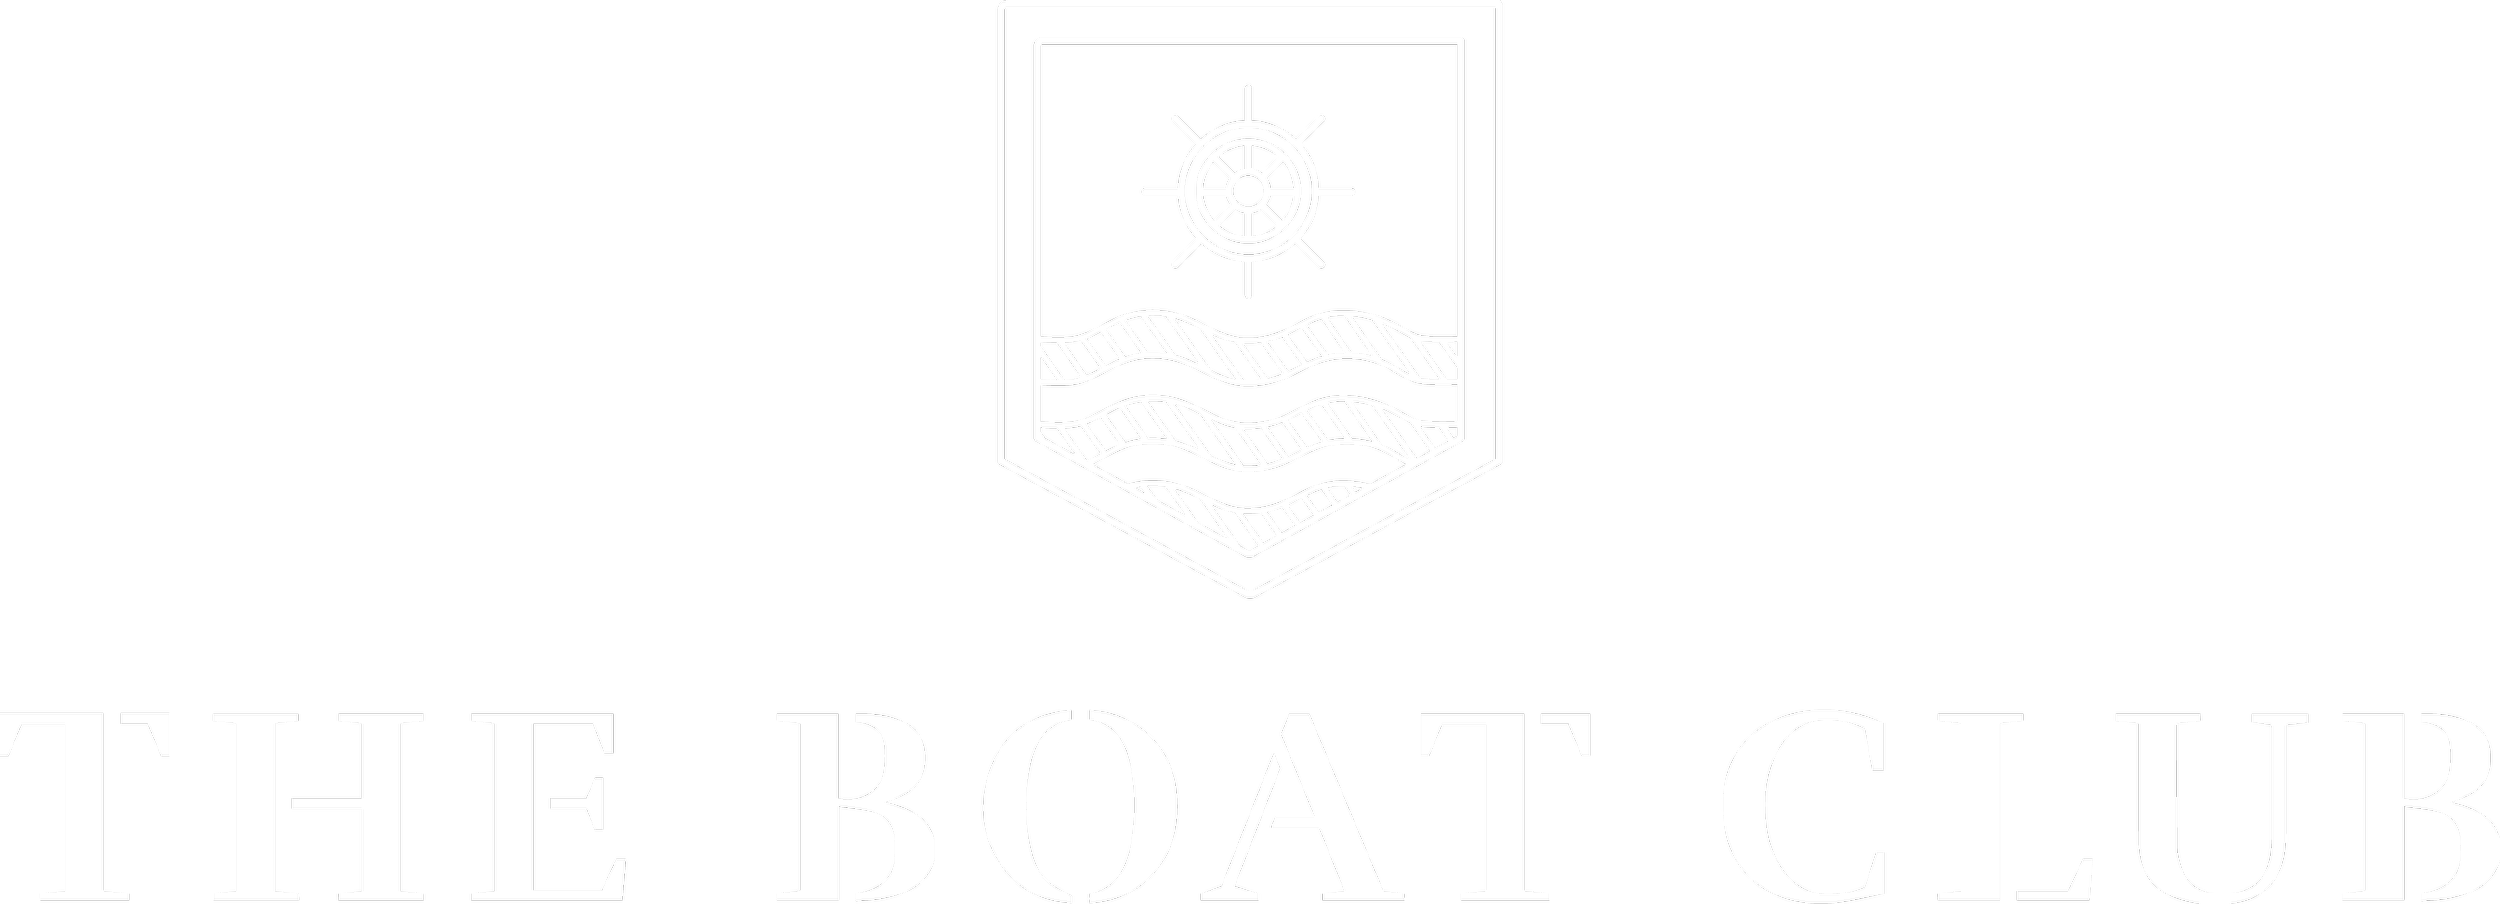 The Boat Club.png